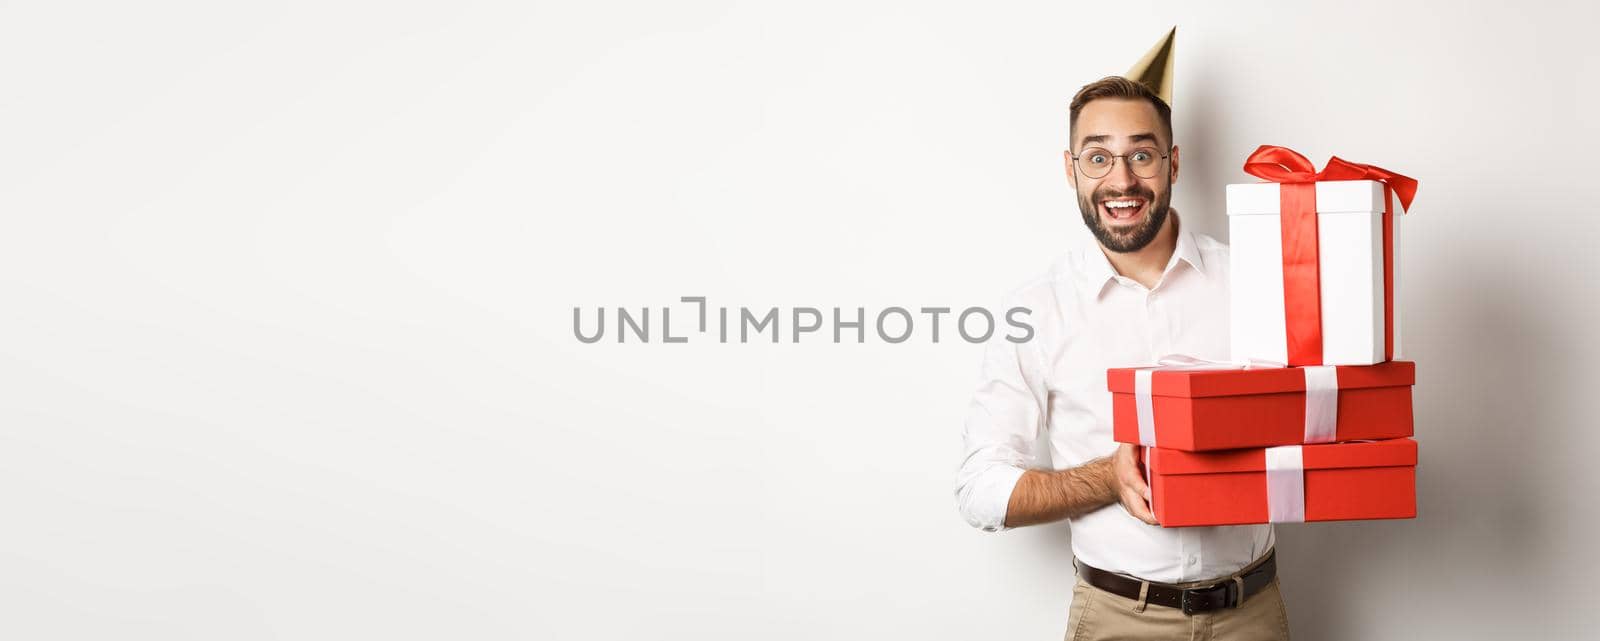 Holidays and celebration. Happy man receiving gifts on birthday, holding presents and looking excited, standing over white background.